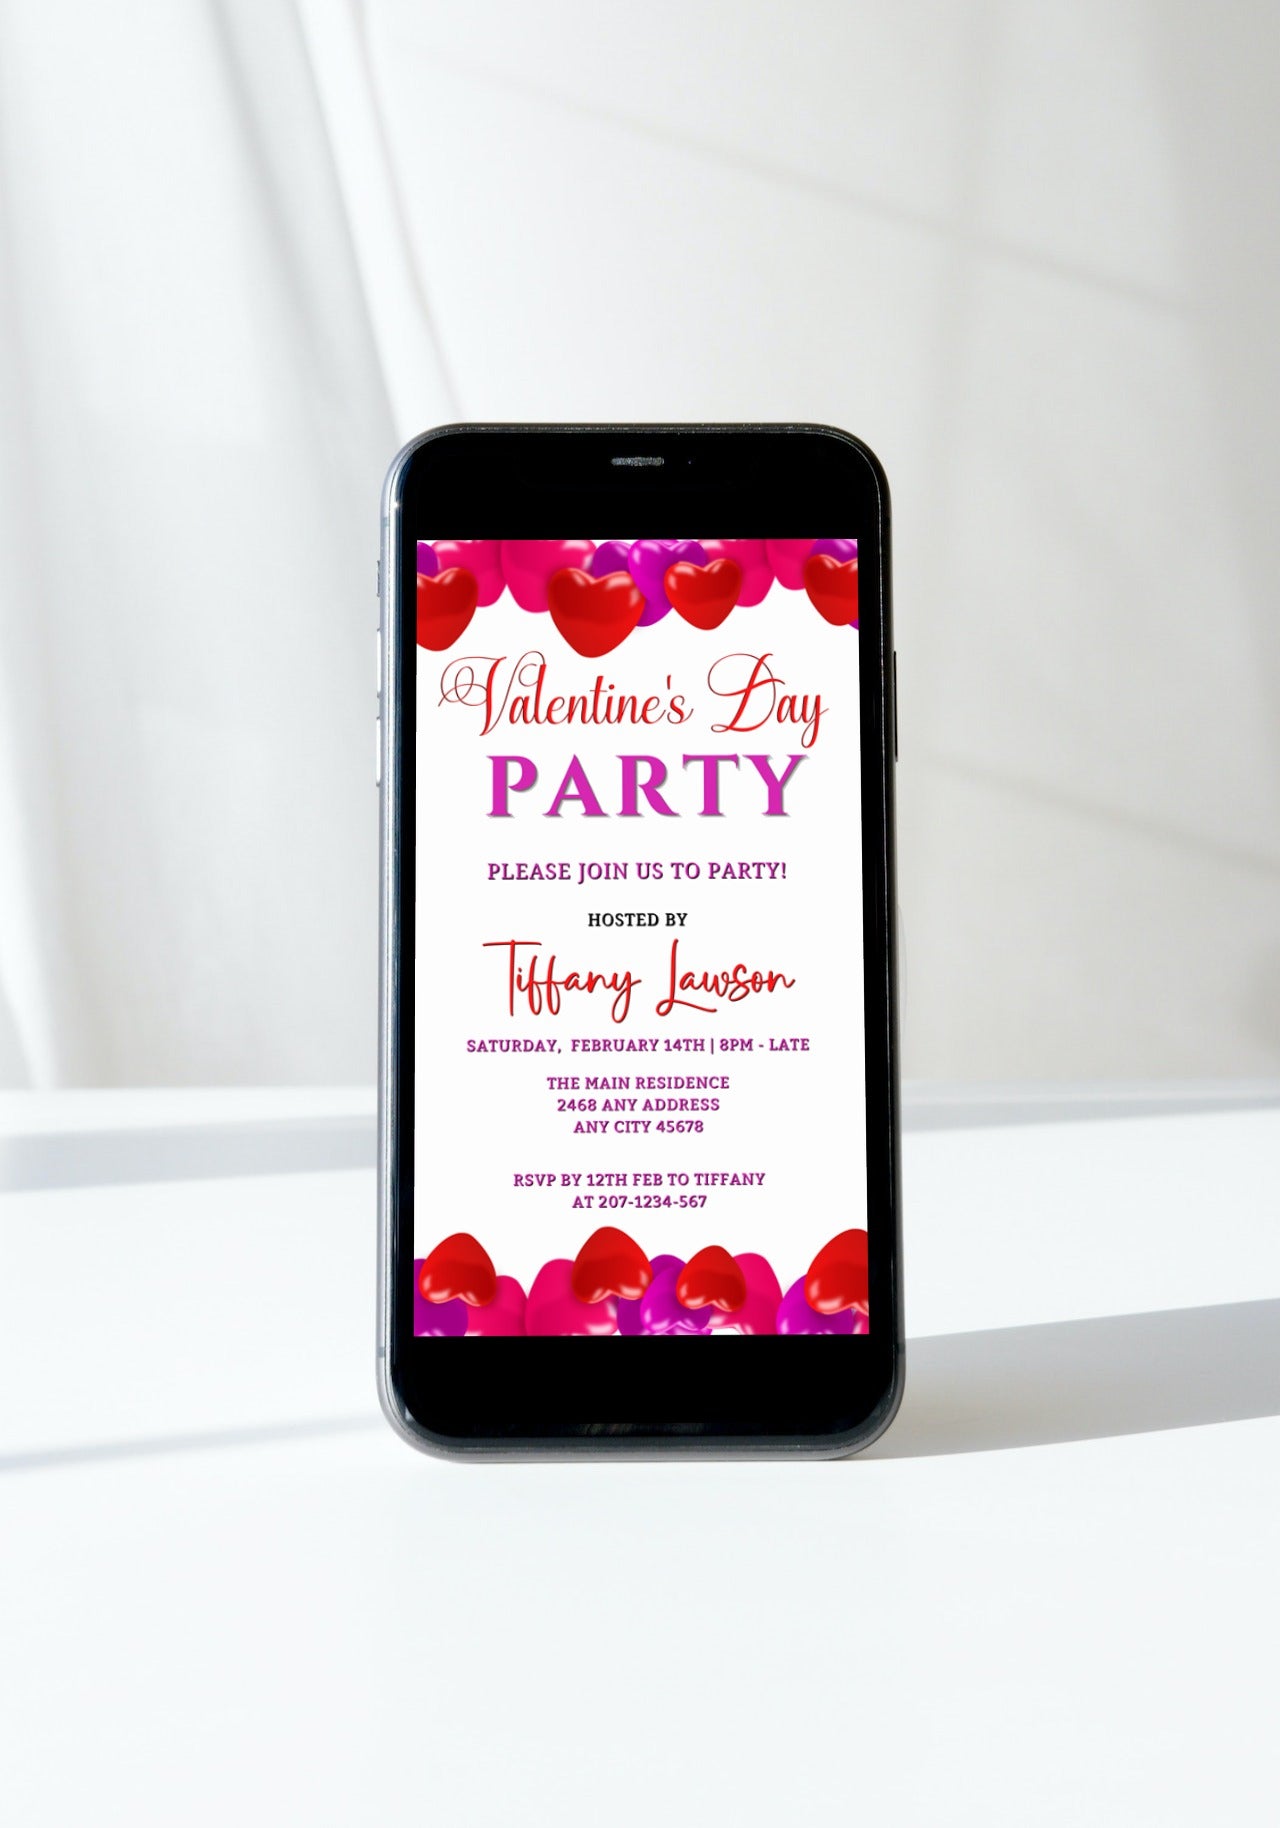 Pink Red Hearts | Valentines Party Evite displayed on a smartphone screen, featuring editable text and heart designs for customizing party invitations via Canva.